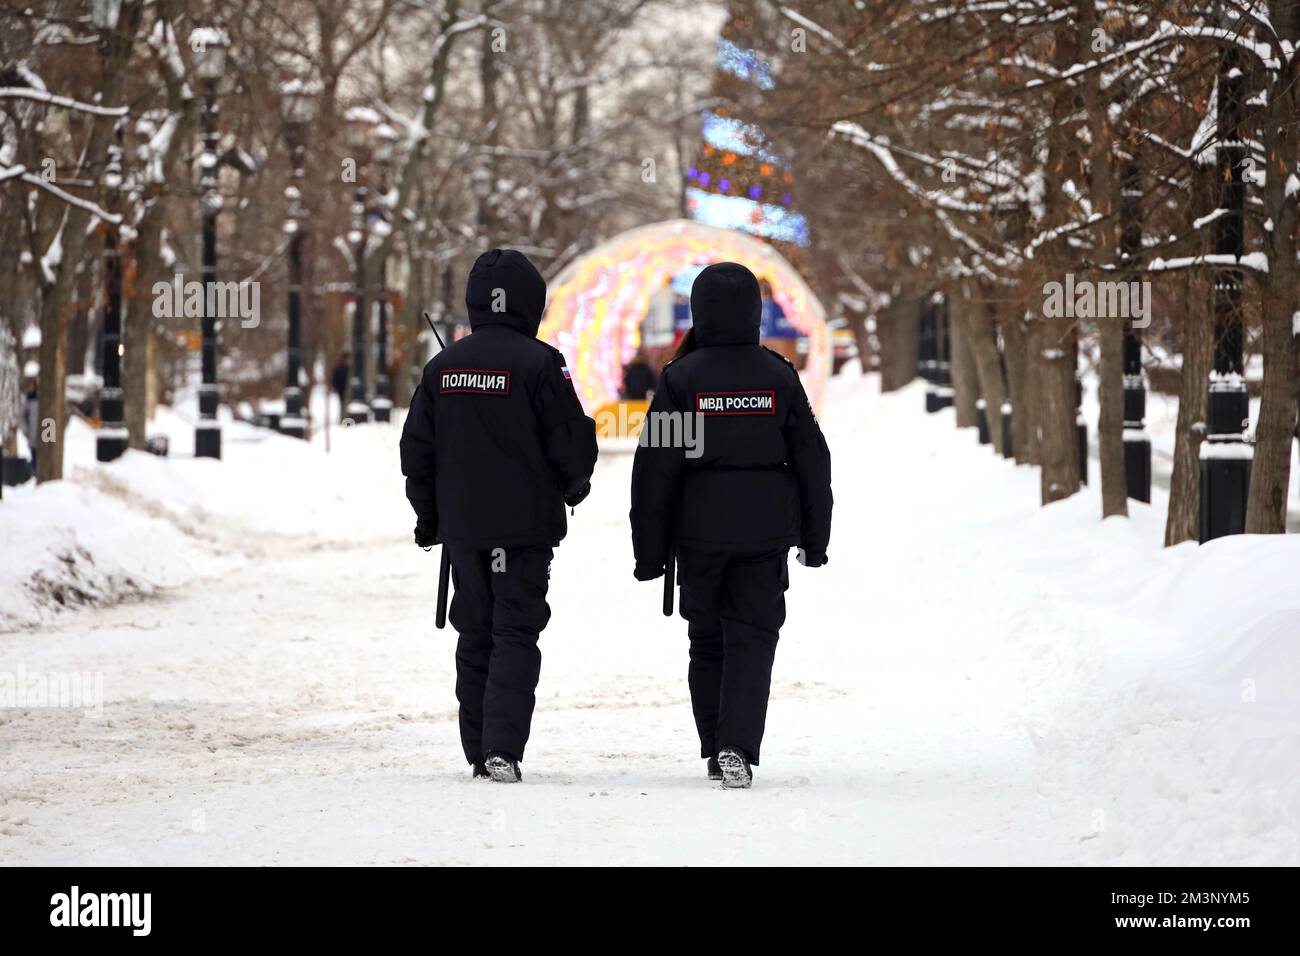 Russian police officers patrol a city street in Moscow on background of New Year decorations. Translation of inscriptions on the human backs: 'Police' Stock Photo